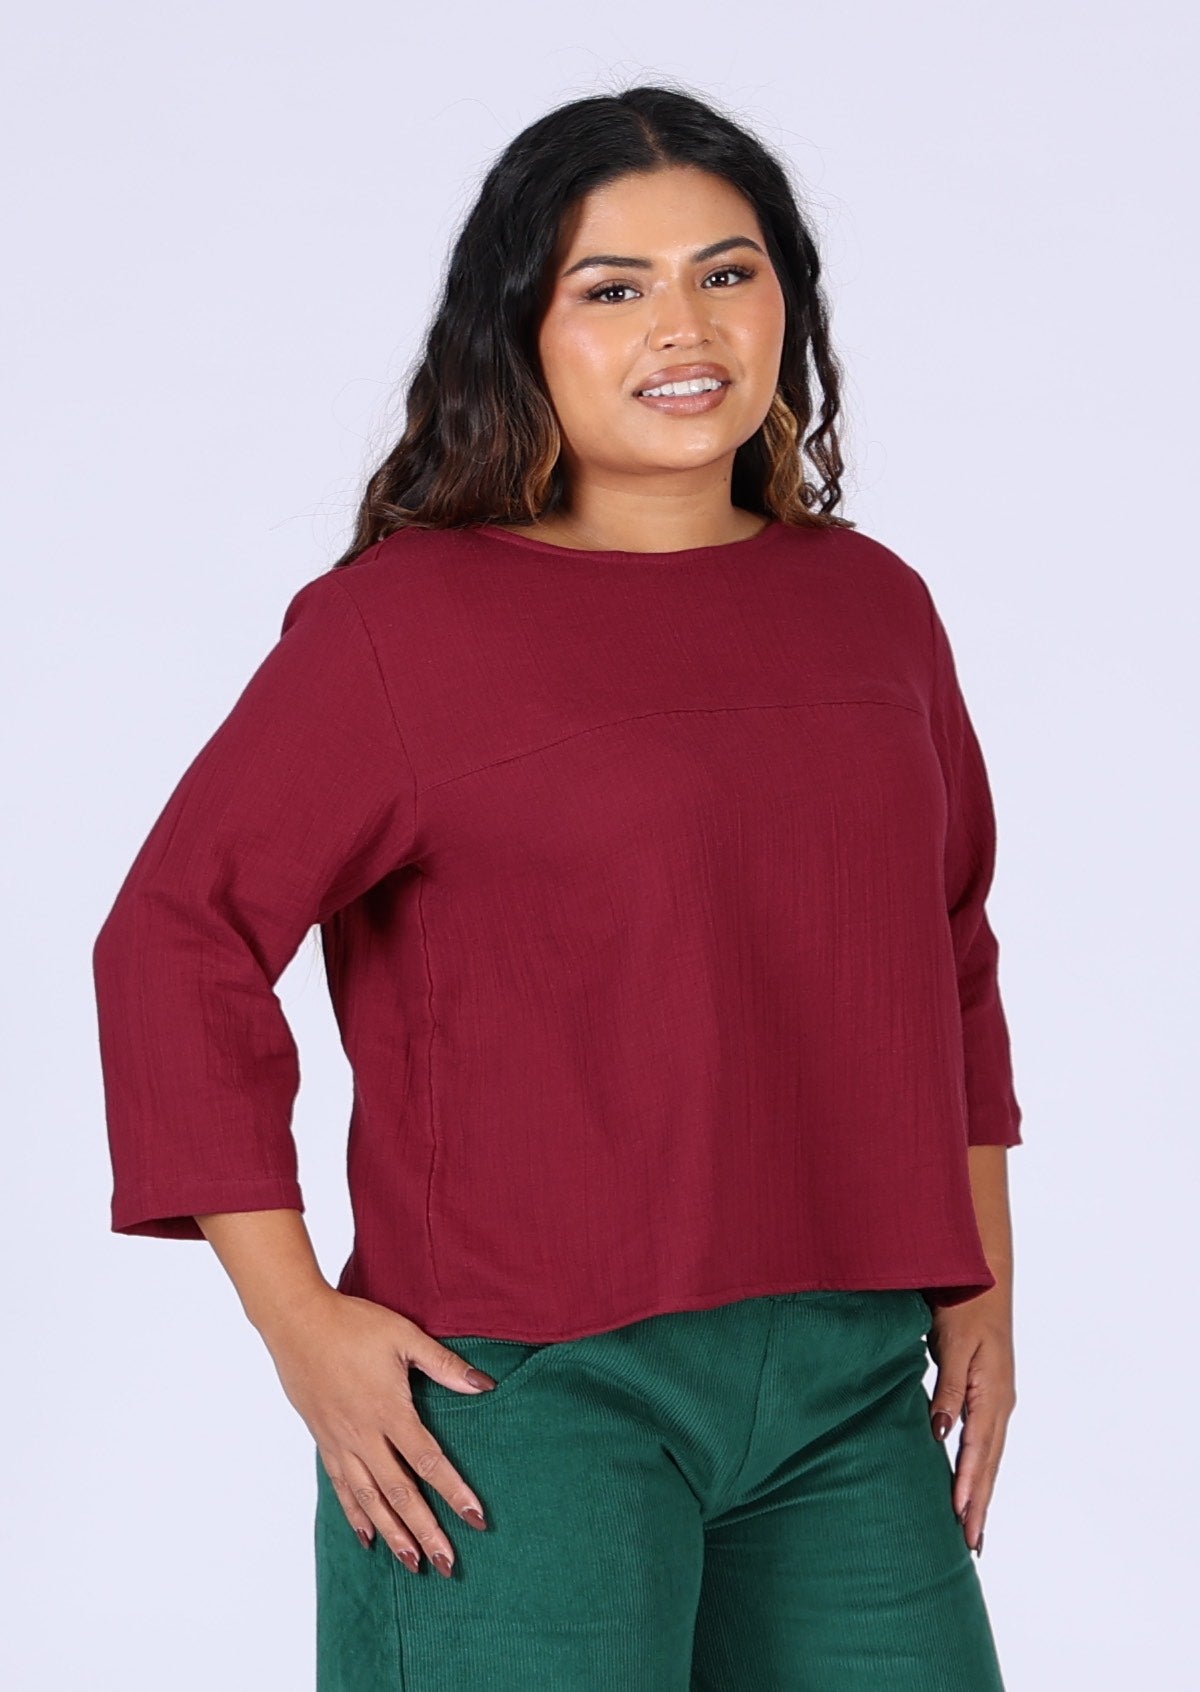 Model wears deep warm red double cotton top with 3/4 sleeves and high round neckline